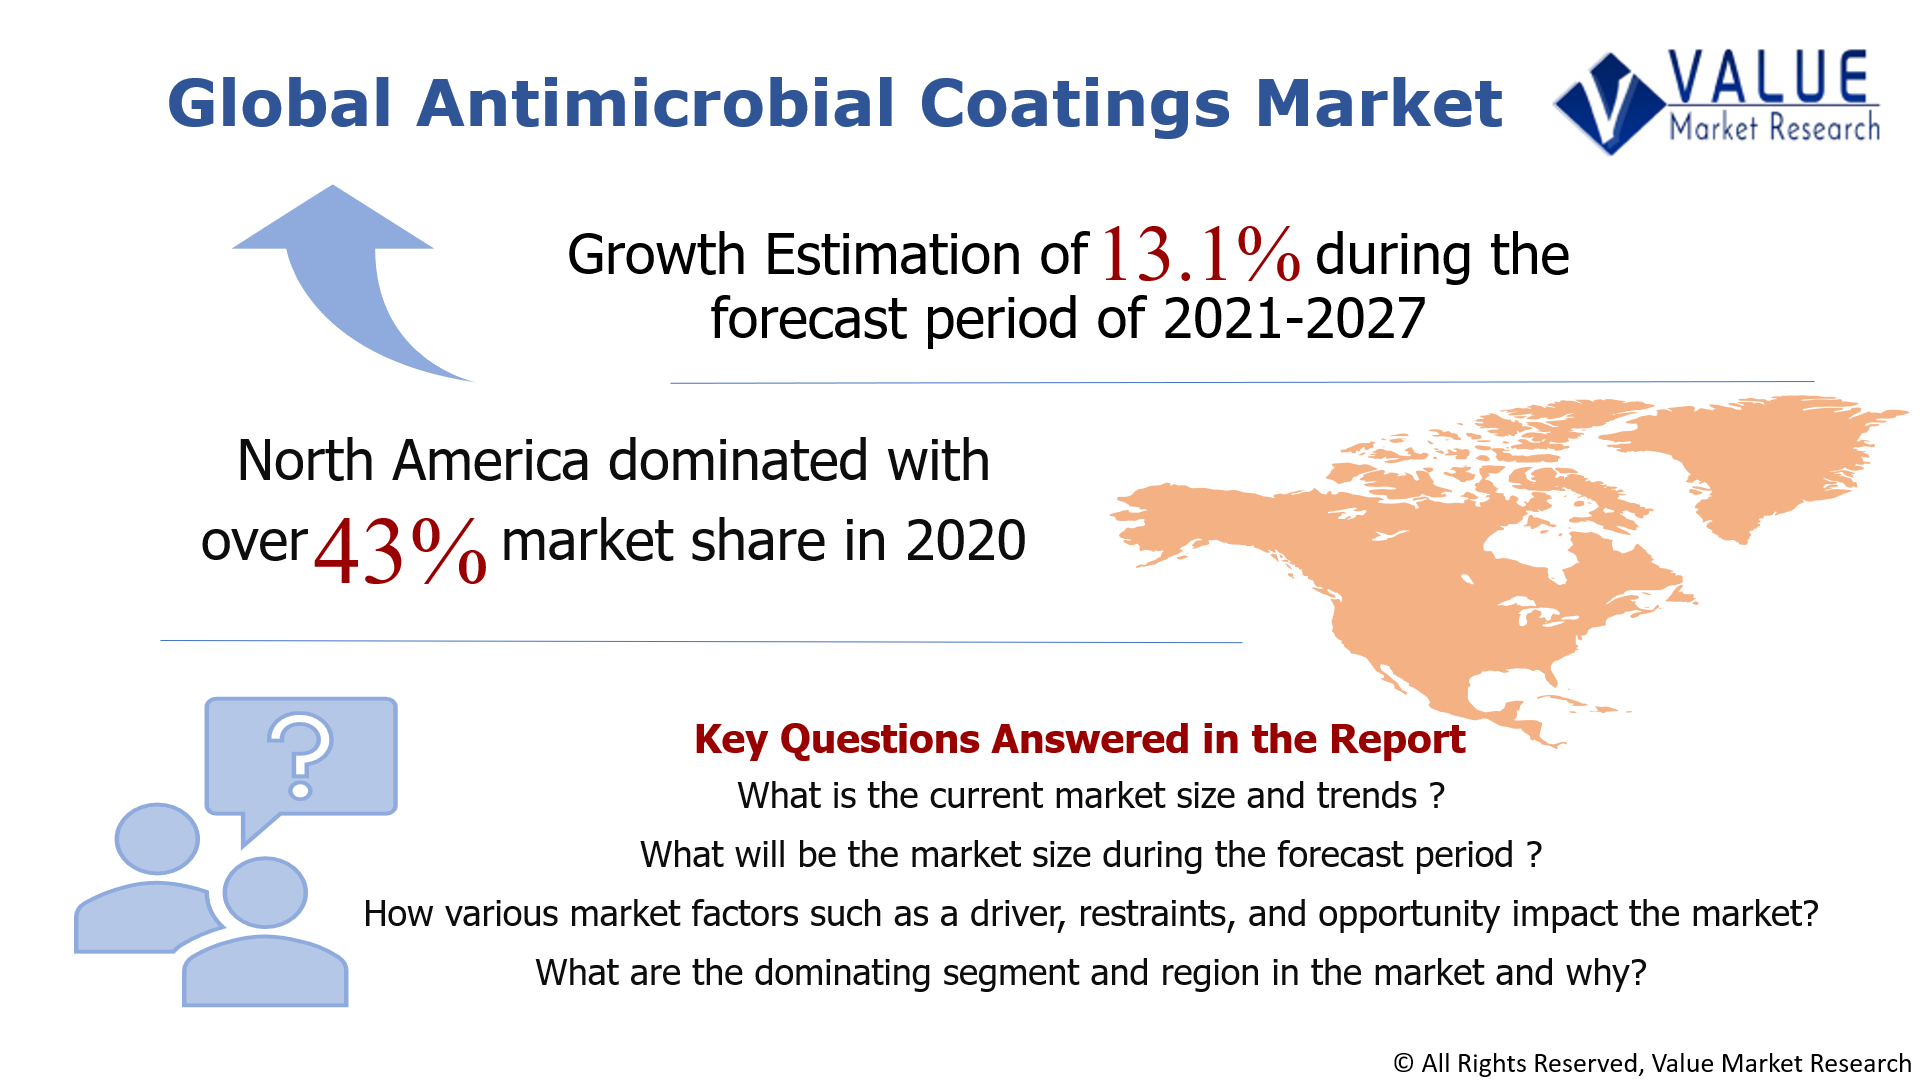 Global Antimicrobial Coatings Market Share